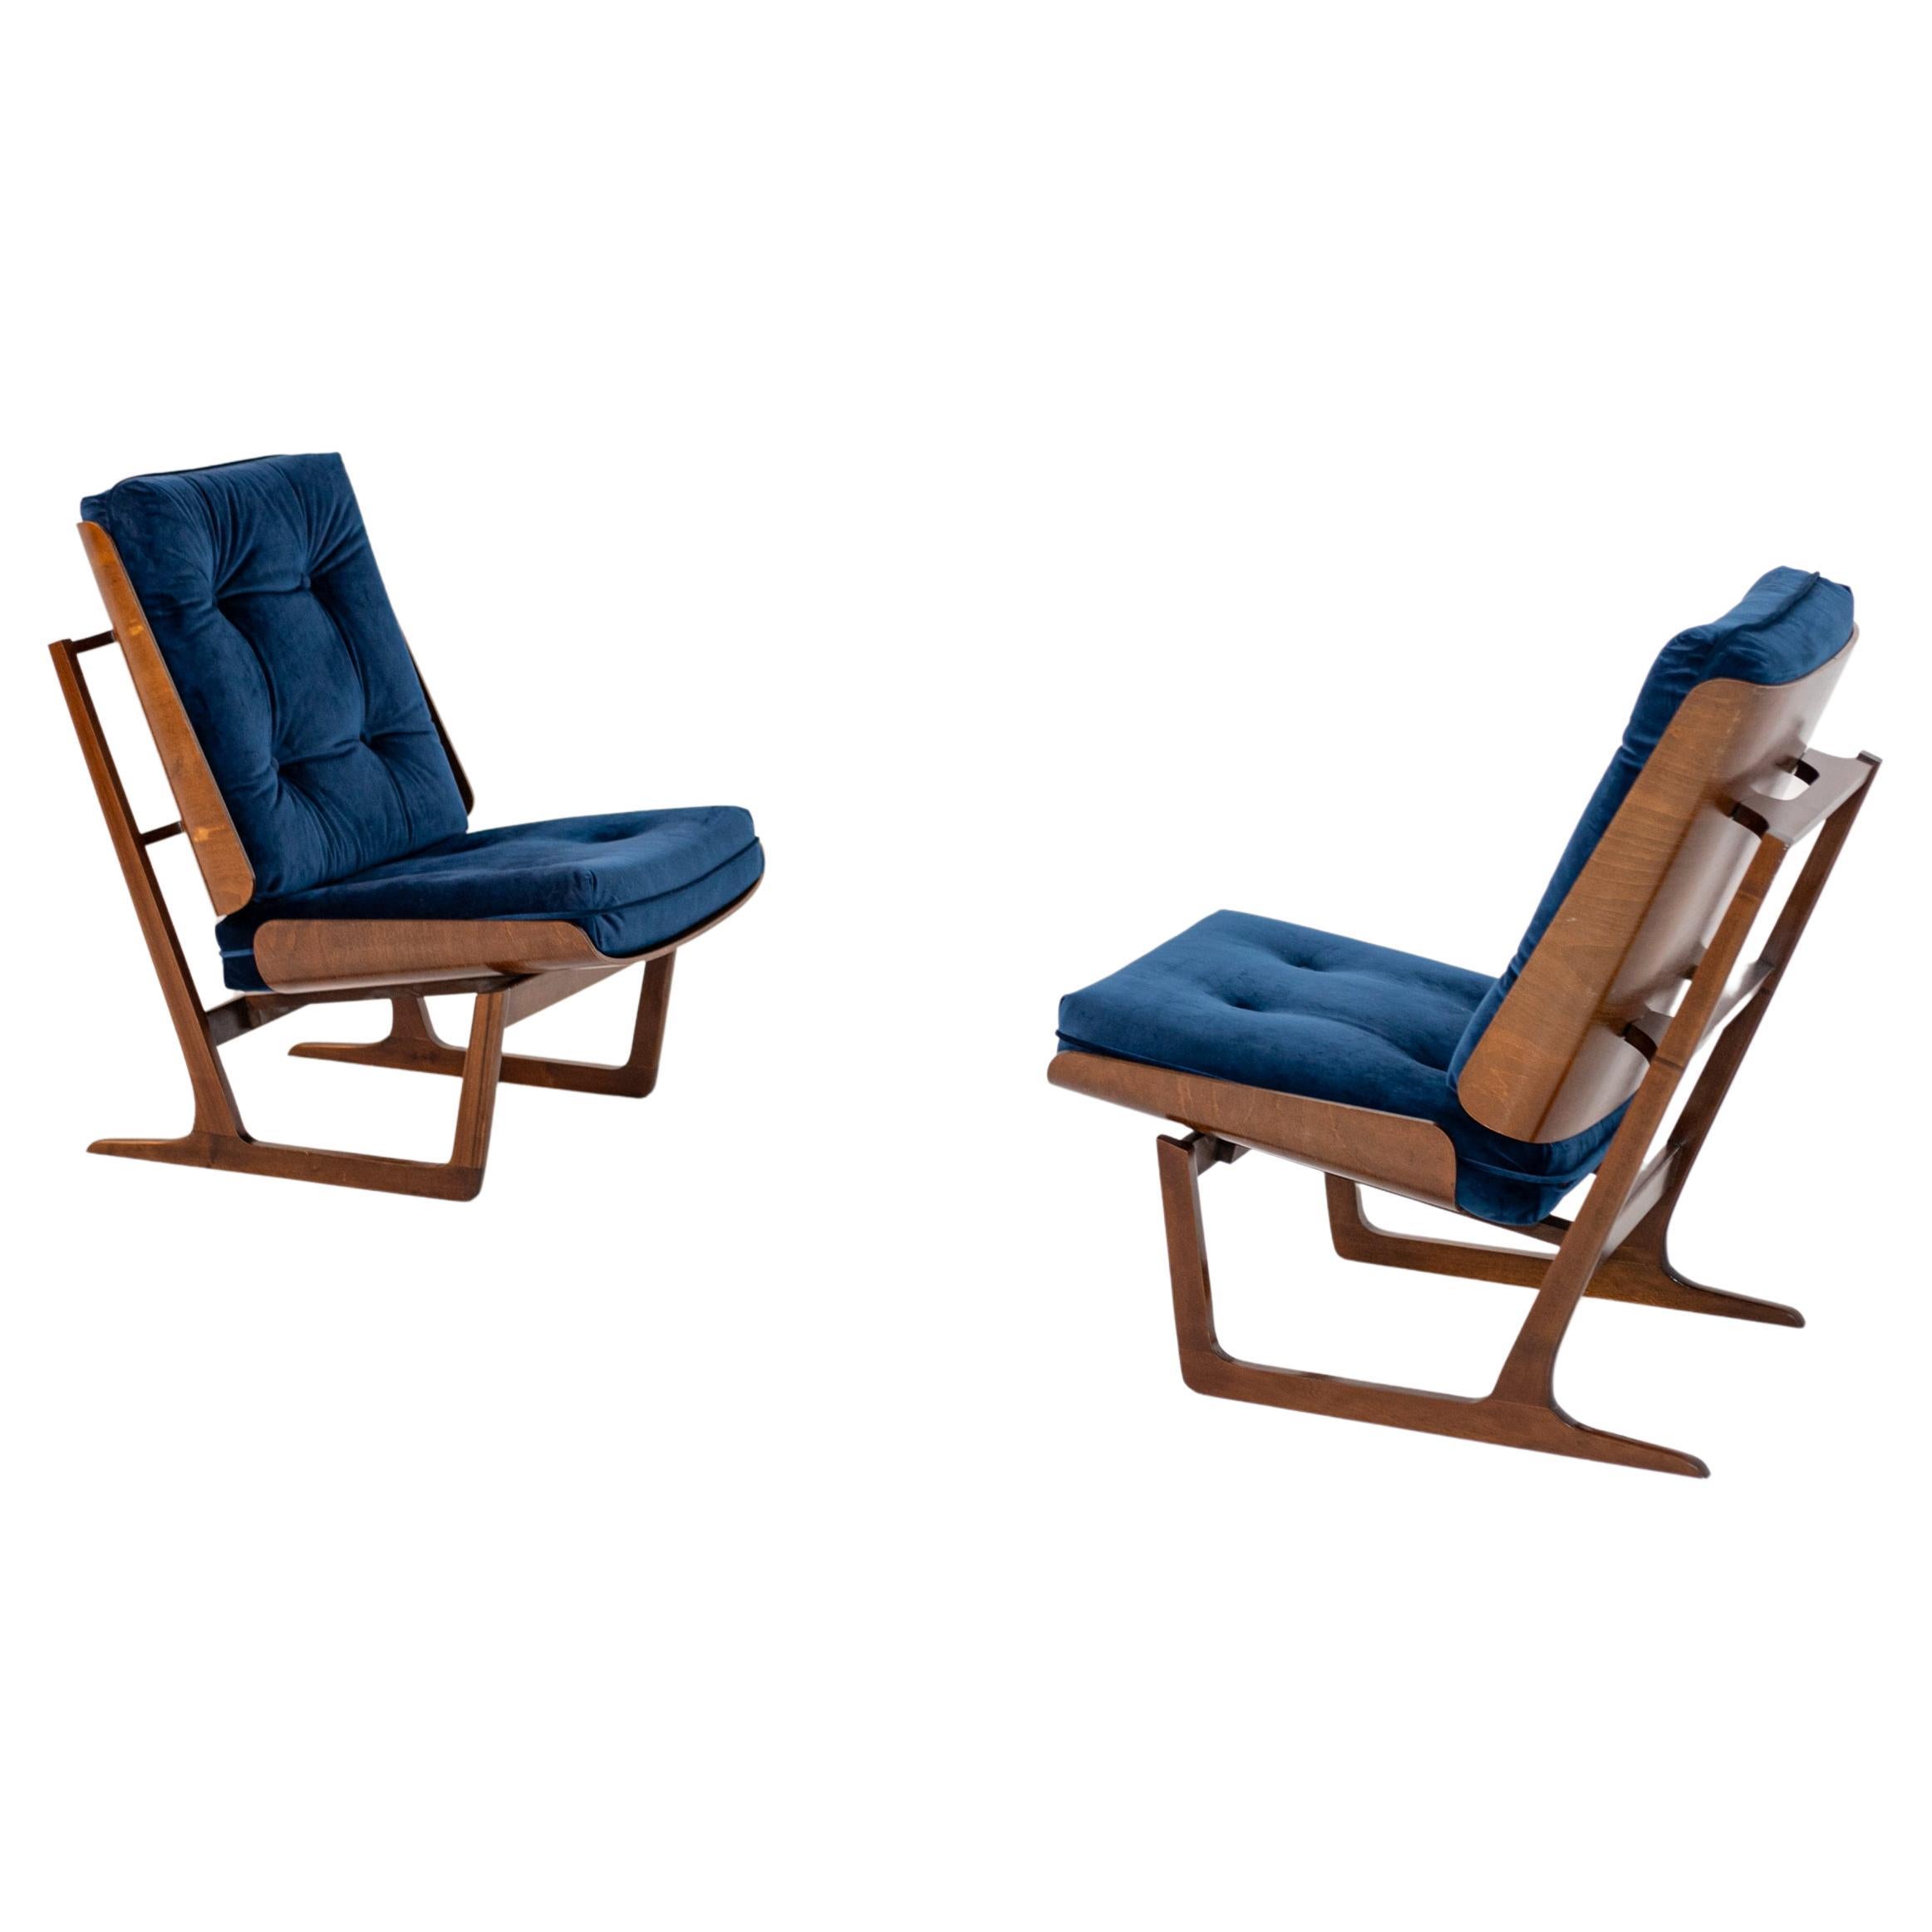 Pair of American Armchairs in Wood and Blue Velvet